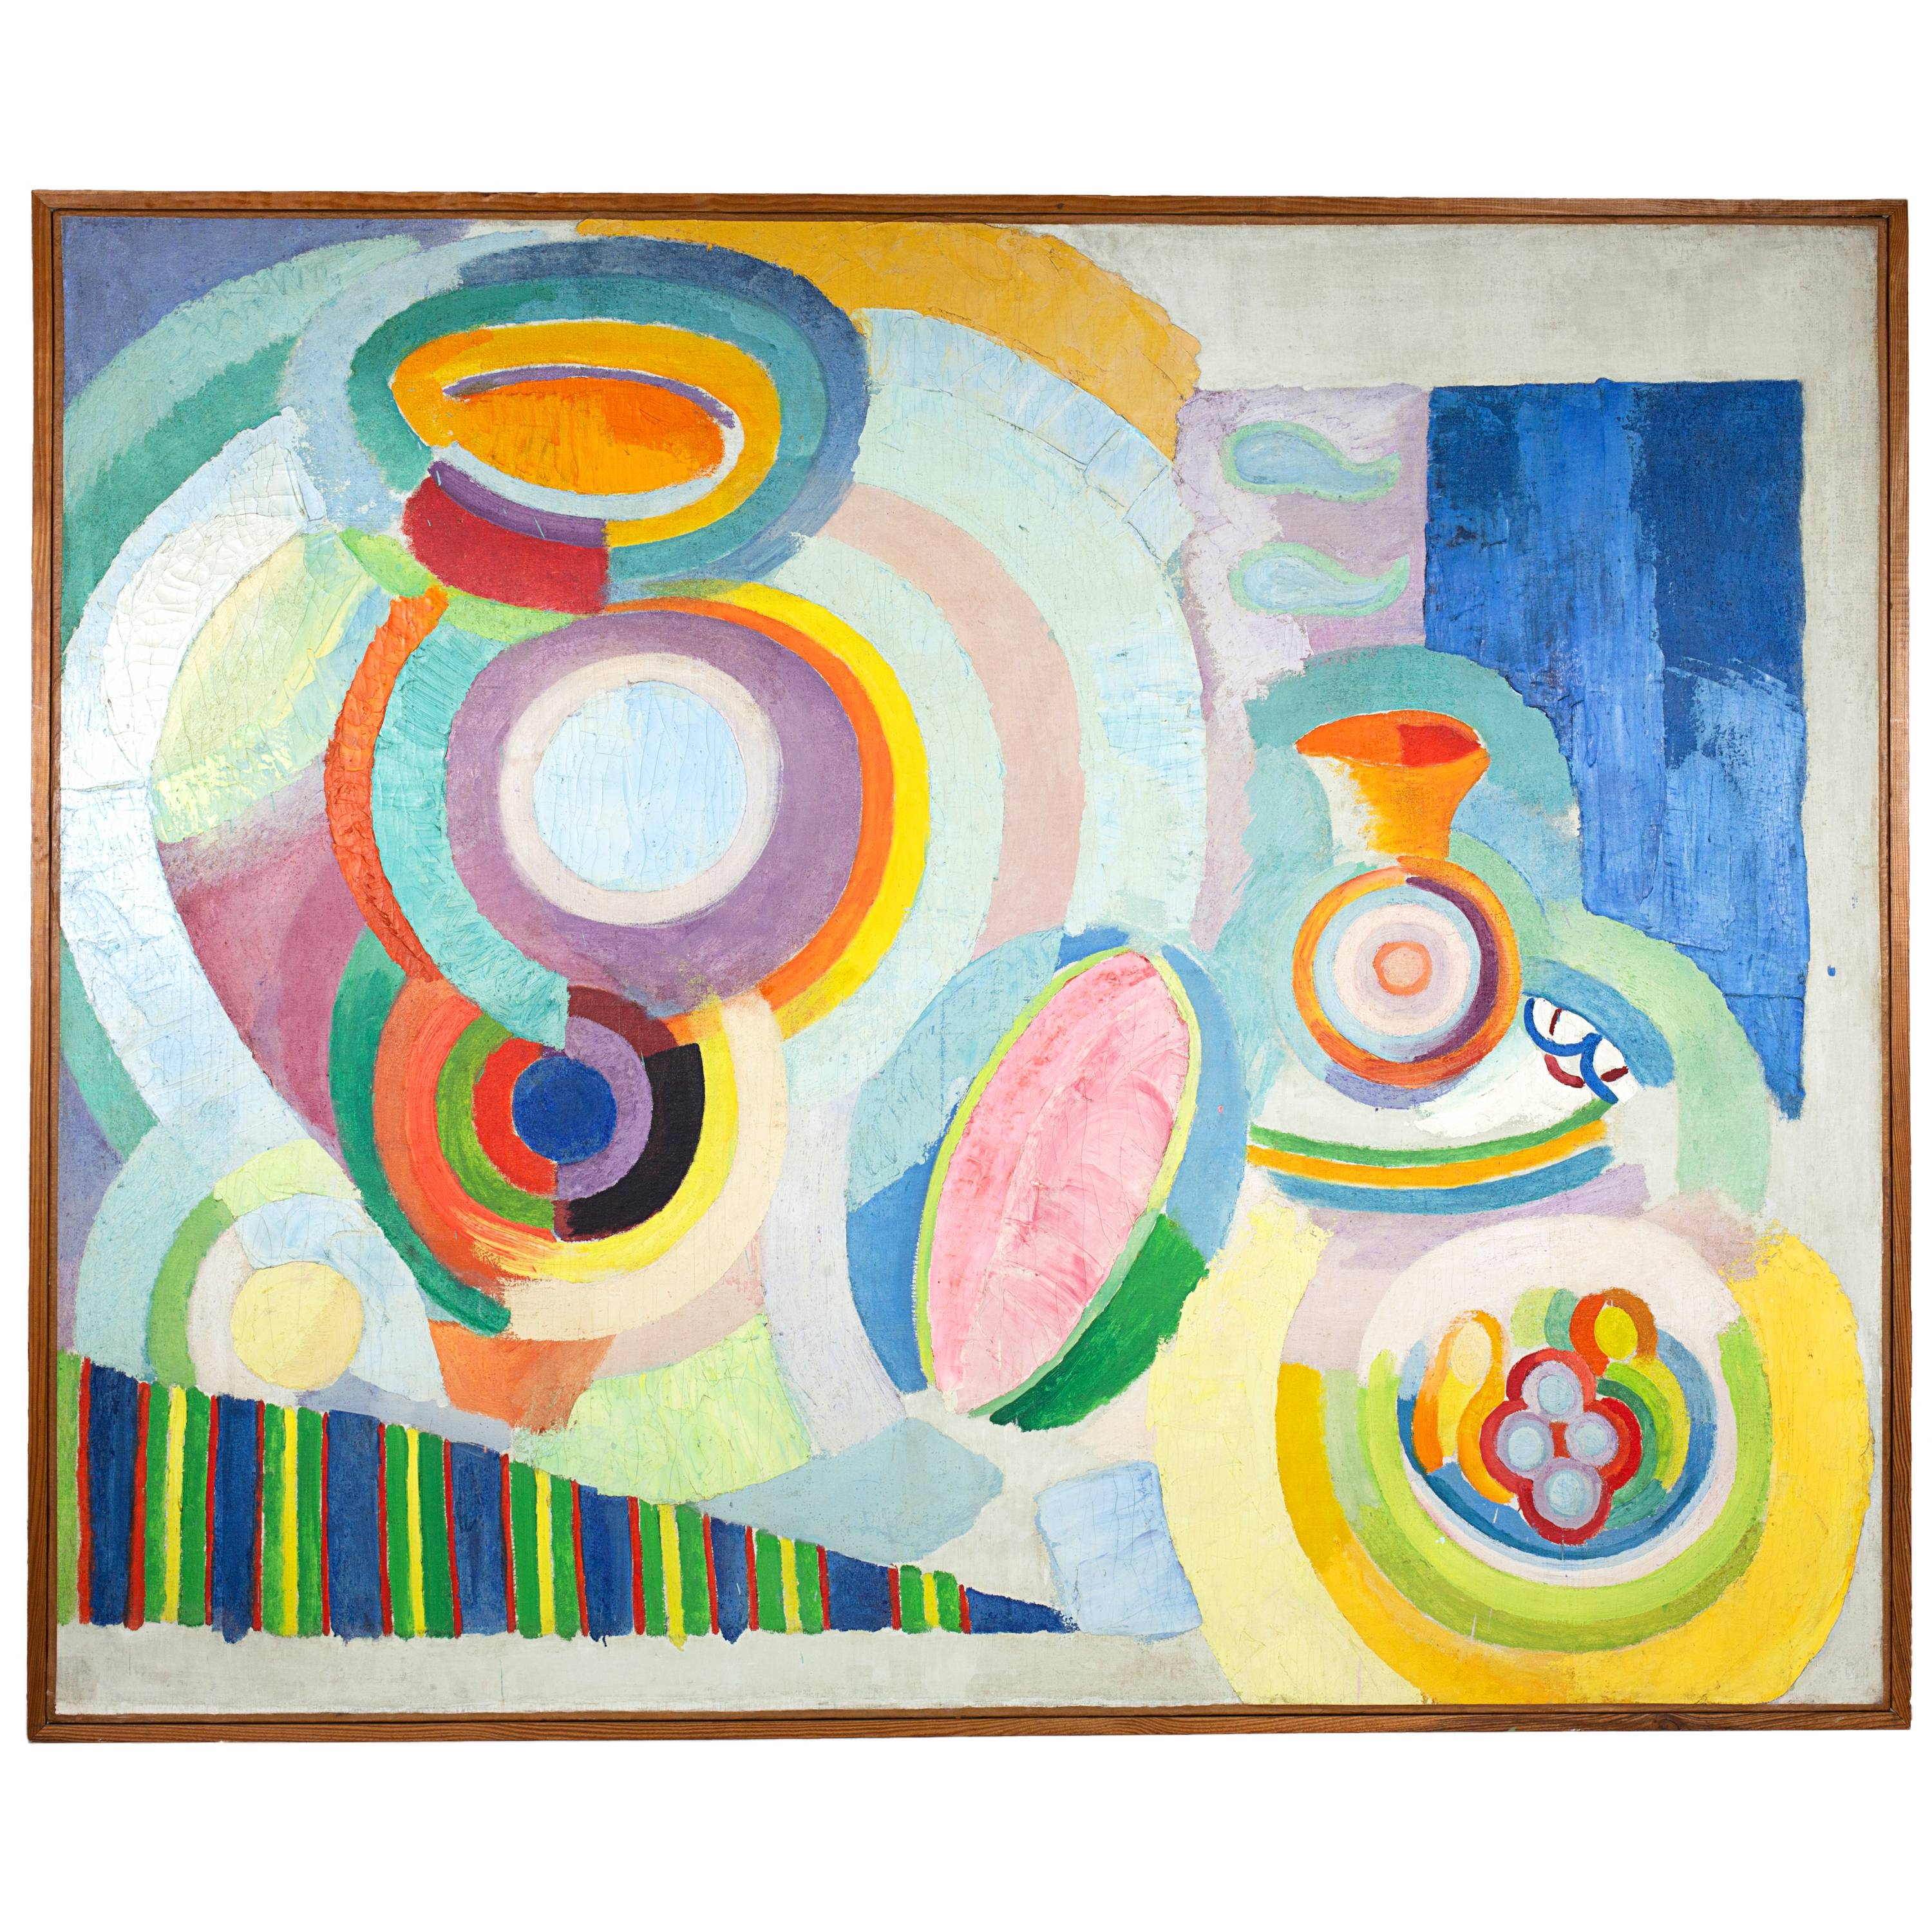 Nature morte portugaise by Robert Delaunay, 1916